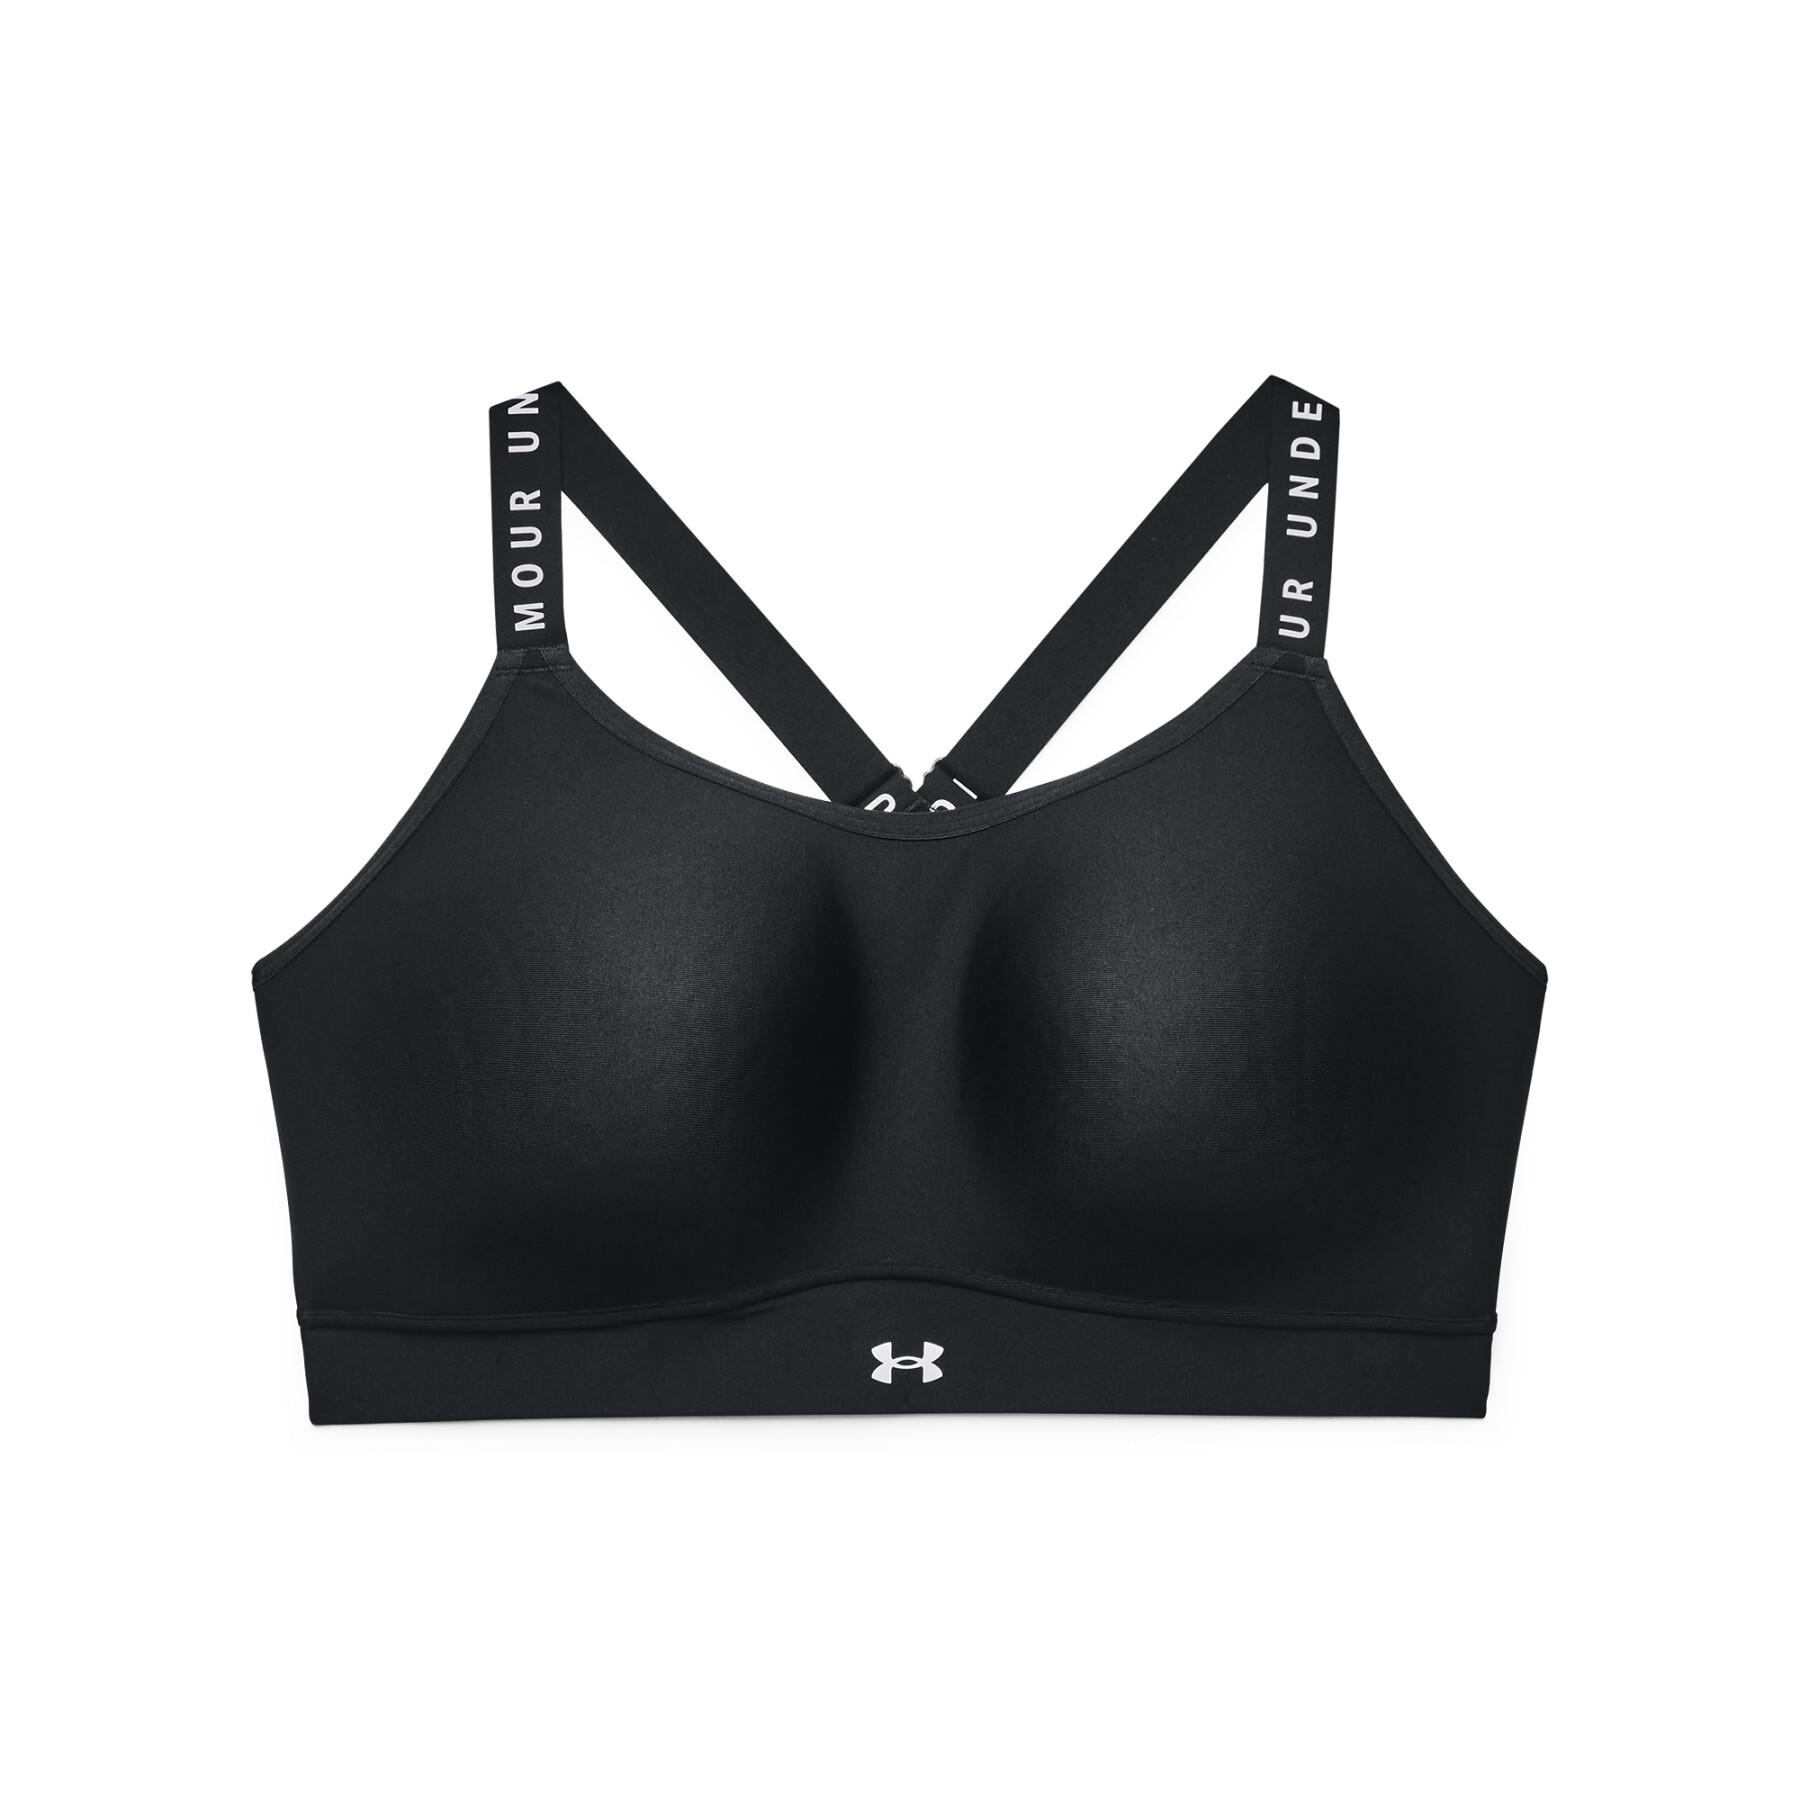 Grote damesbeha Under Armour Infinity